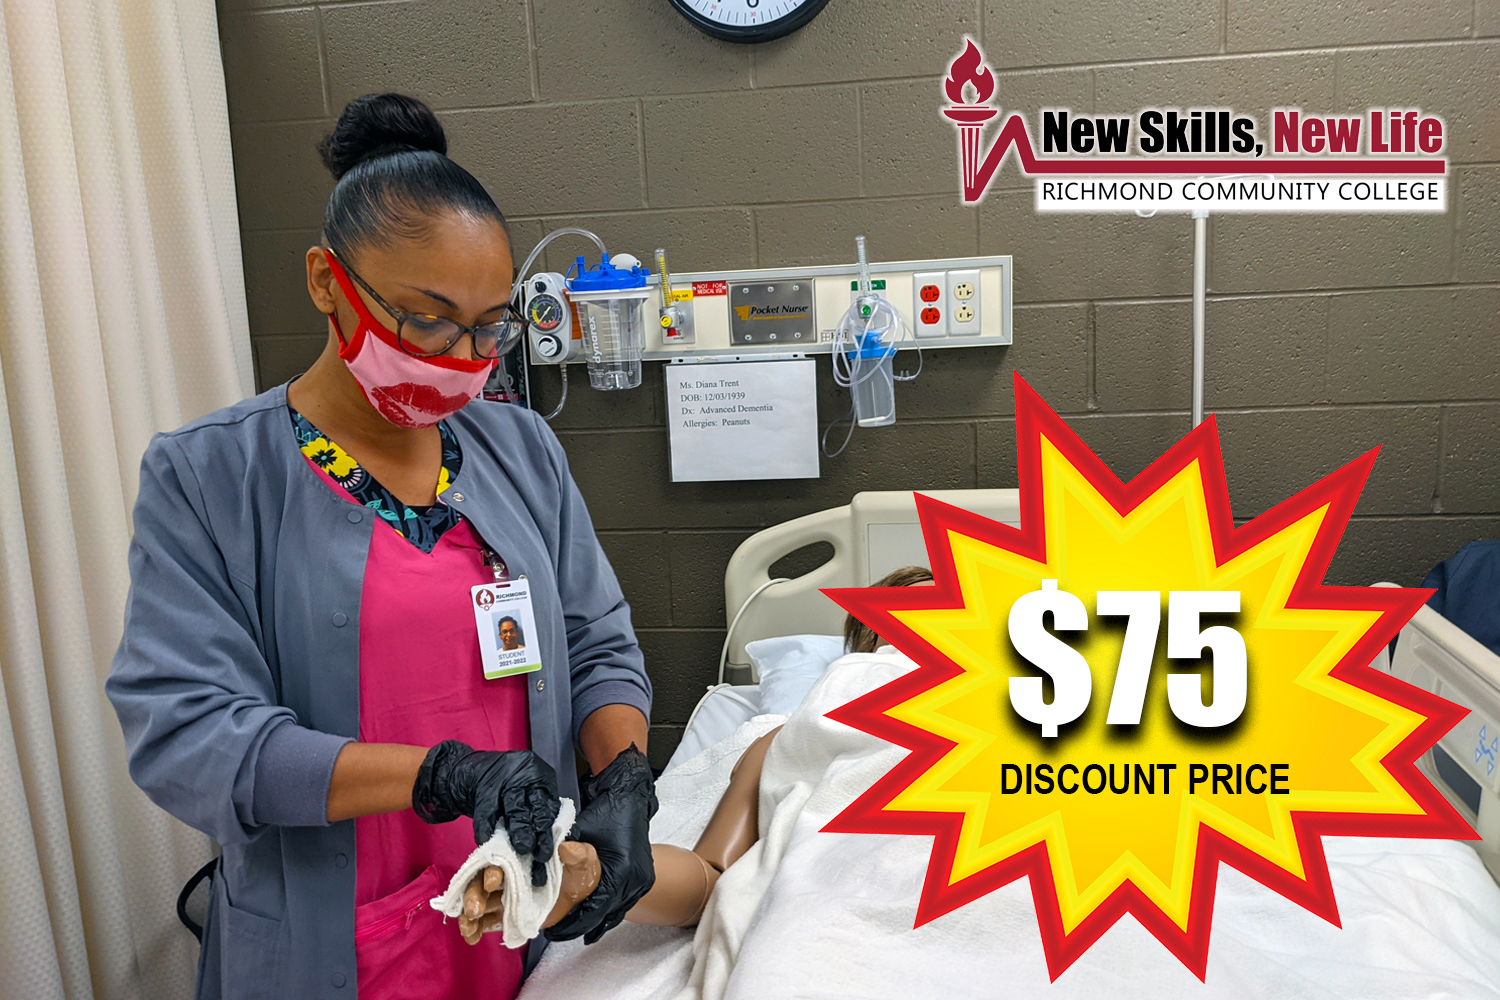 Nursing Assistant Students with $75 discounted fee